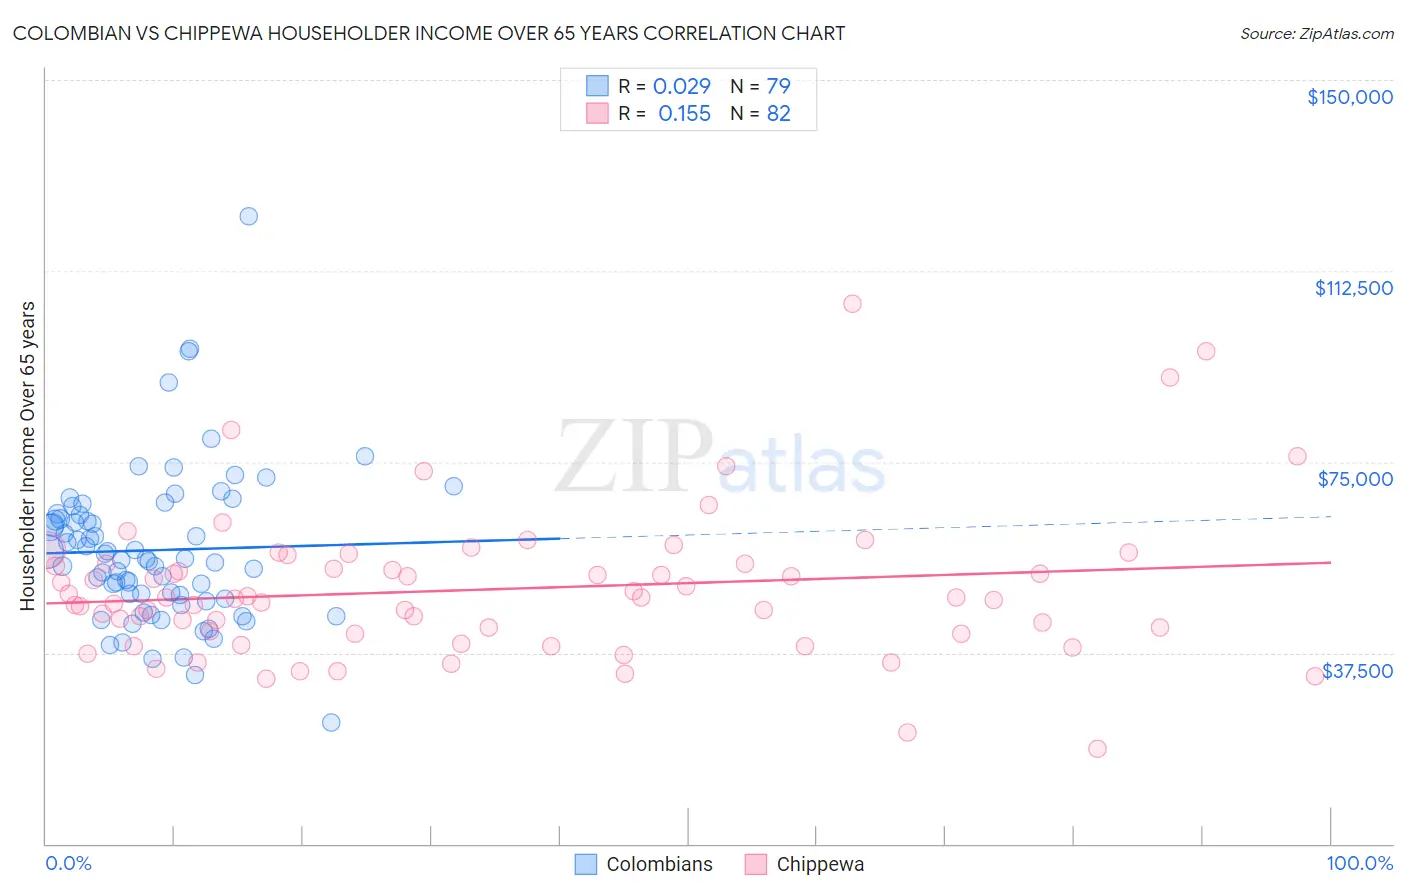 Colombian vs Chippewa Householder Income Over 65 years